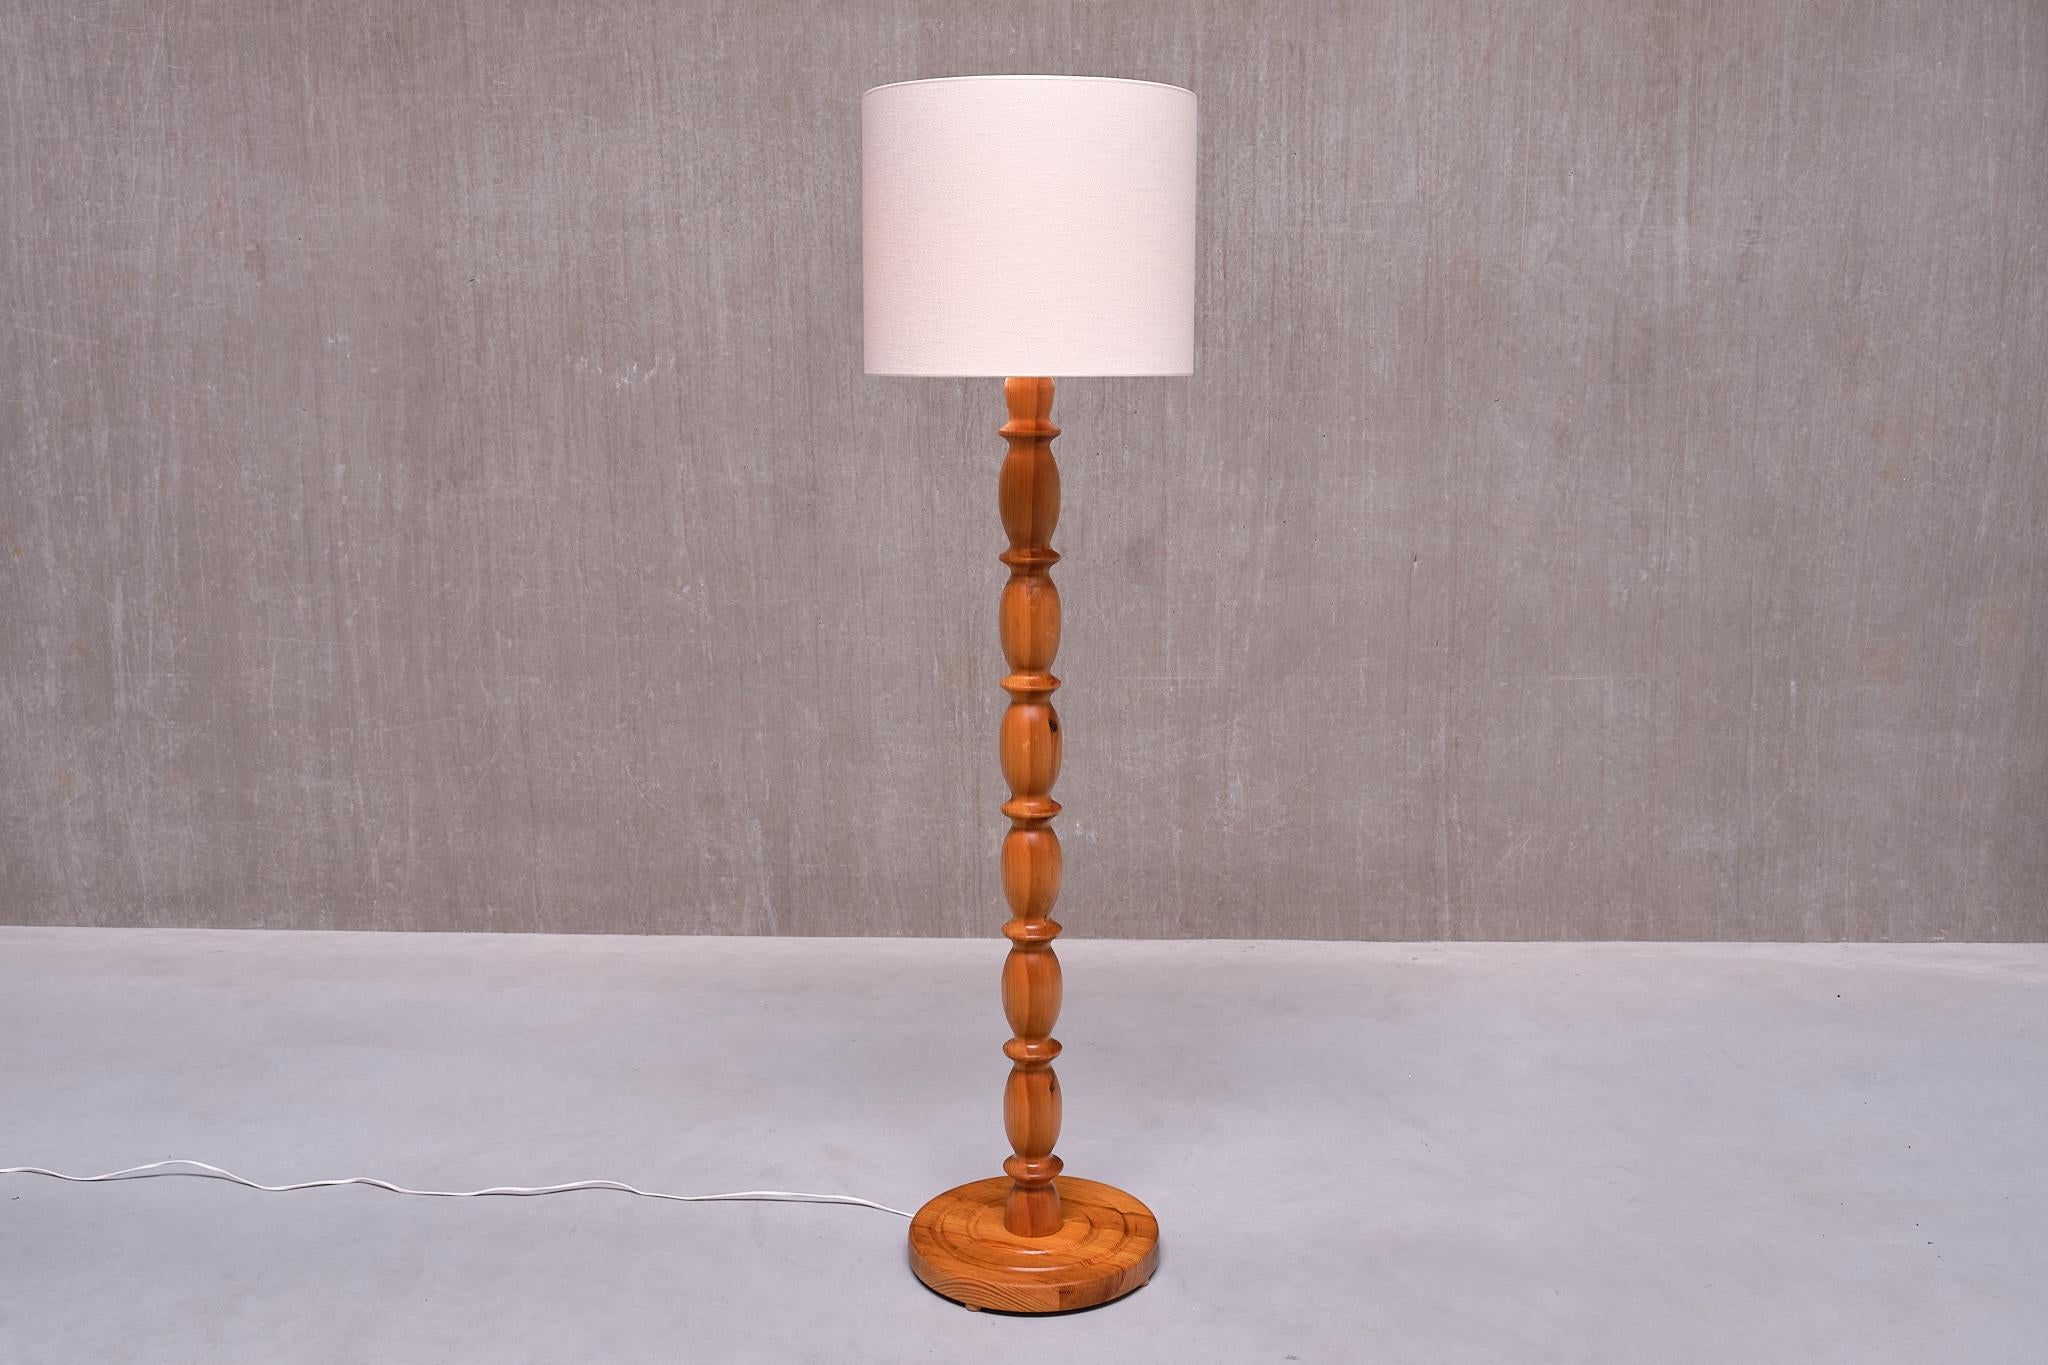 This striking tall floor lamp was produced in Sweden in the 1960s.

The Swedish Modern design is characterized by a central stem crafted from solid pine wood, featuring alternating elliptical and disc-shaped carved elements. The circular base,